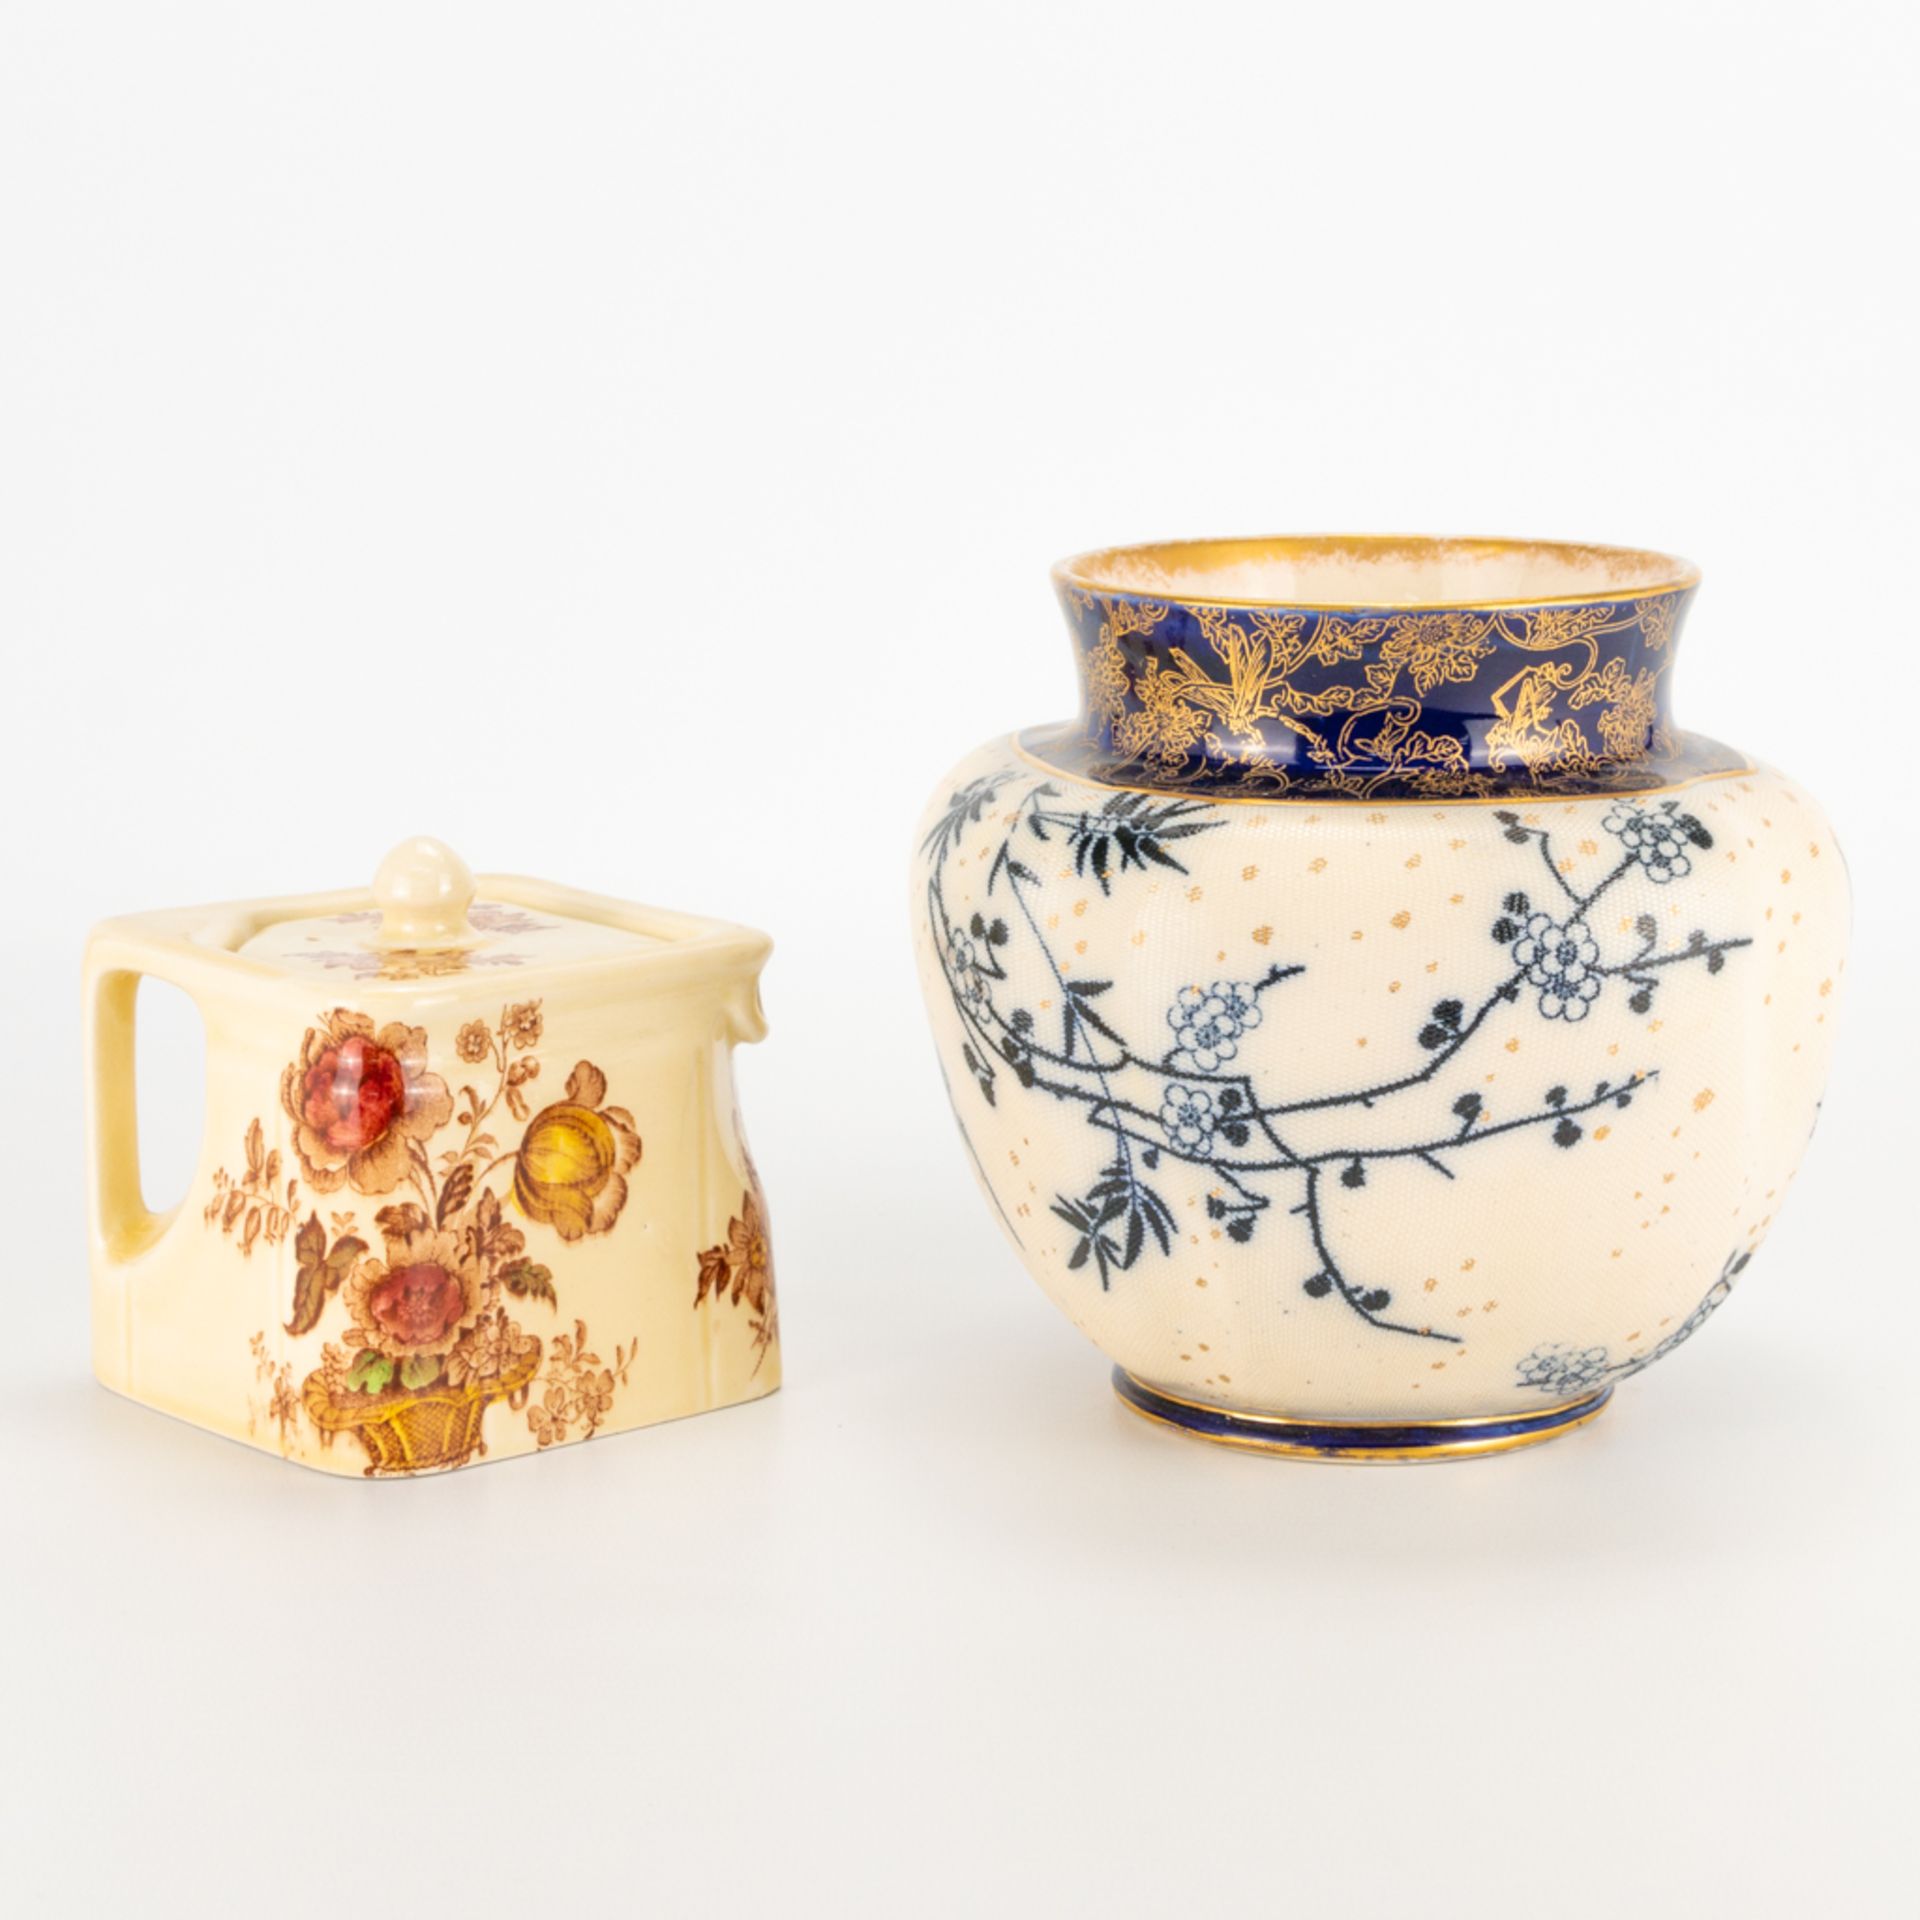 A collection of 2 pieces of English porcelain, a vase made by Doulton and a tea pot made by Clarice - Image 6 of 17